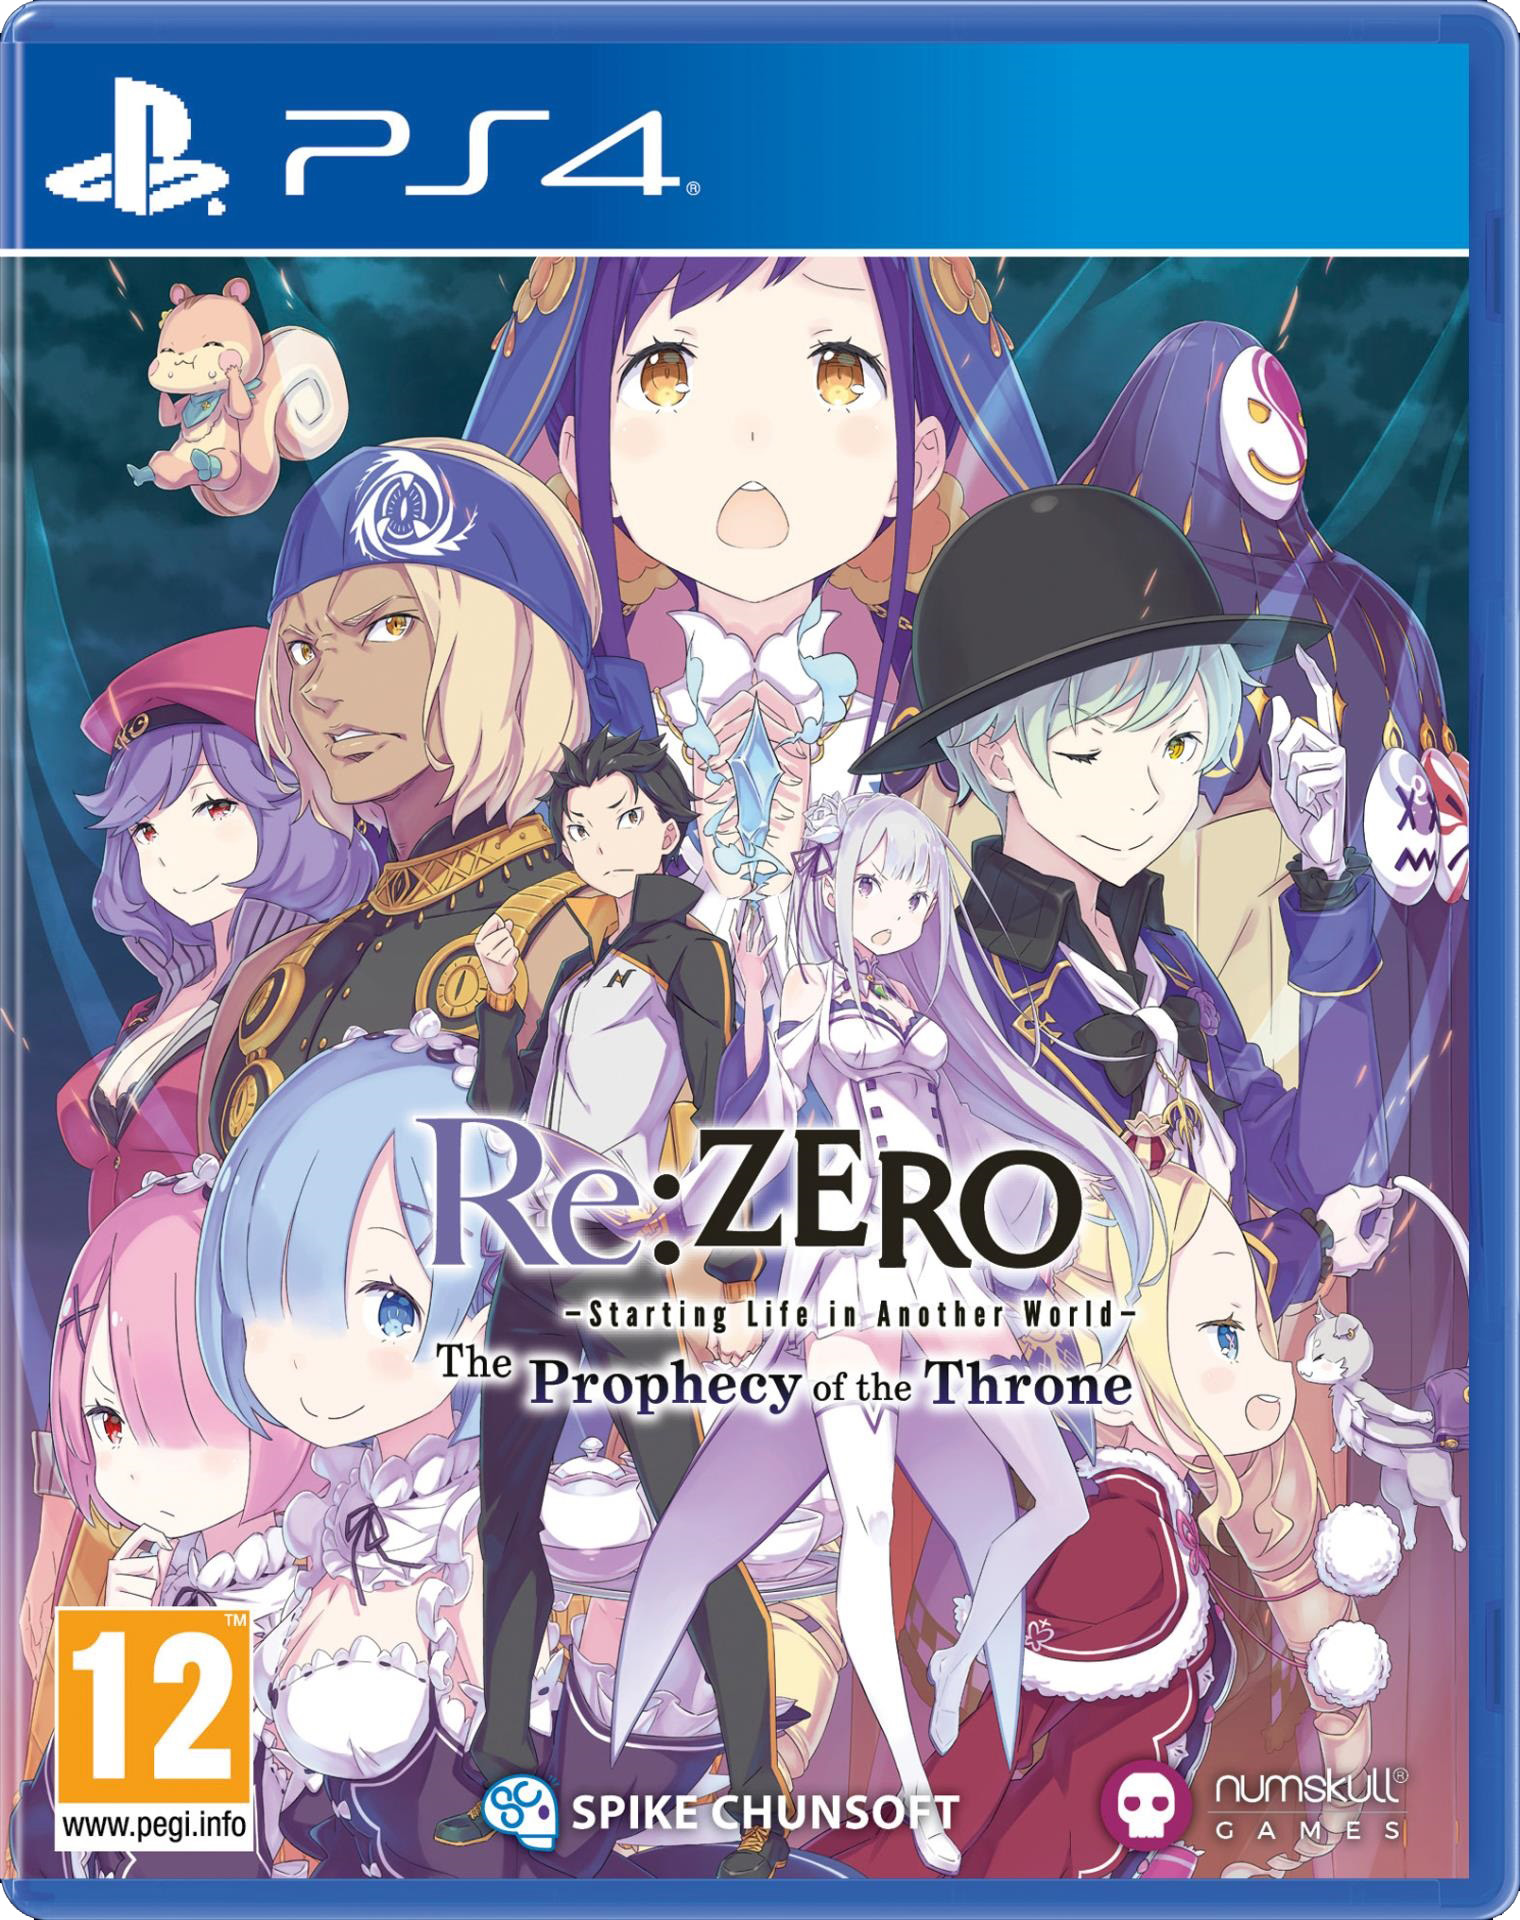 Re:ZERO Starting Life in Another World: The Prophecy of the Throne (PS4), Numskull